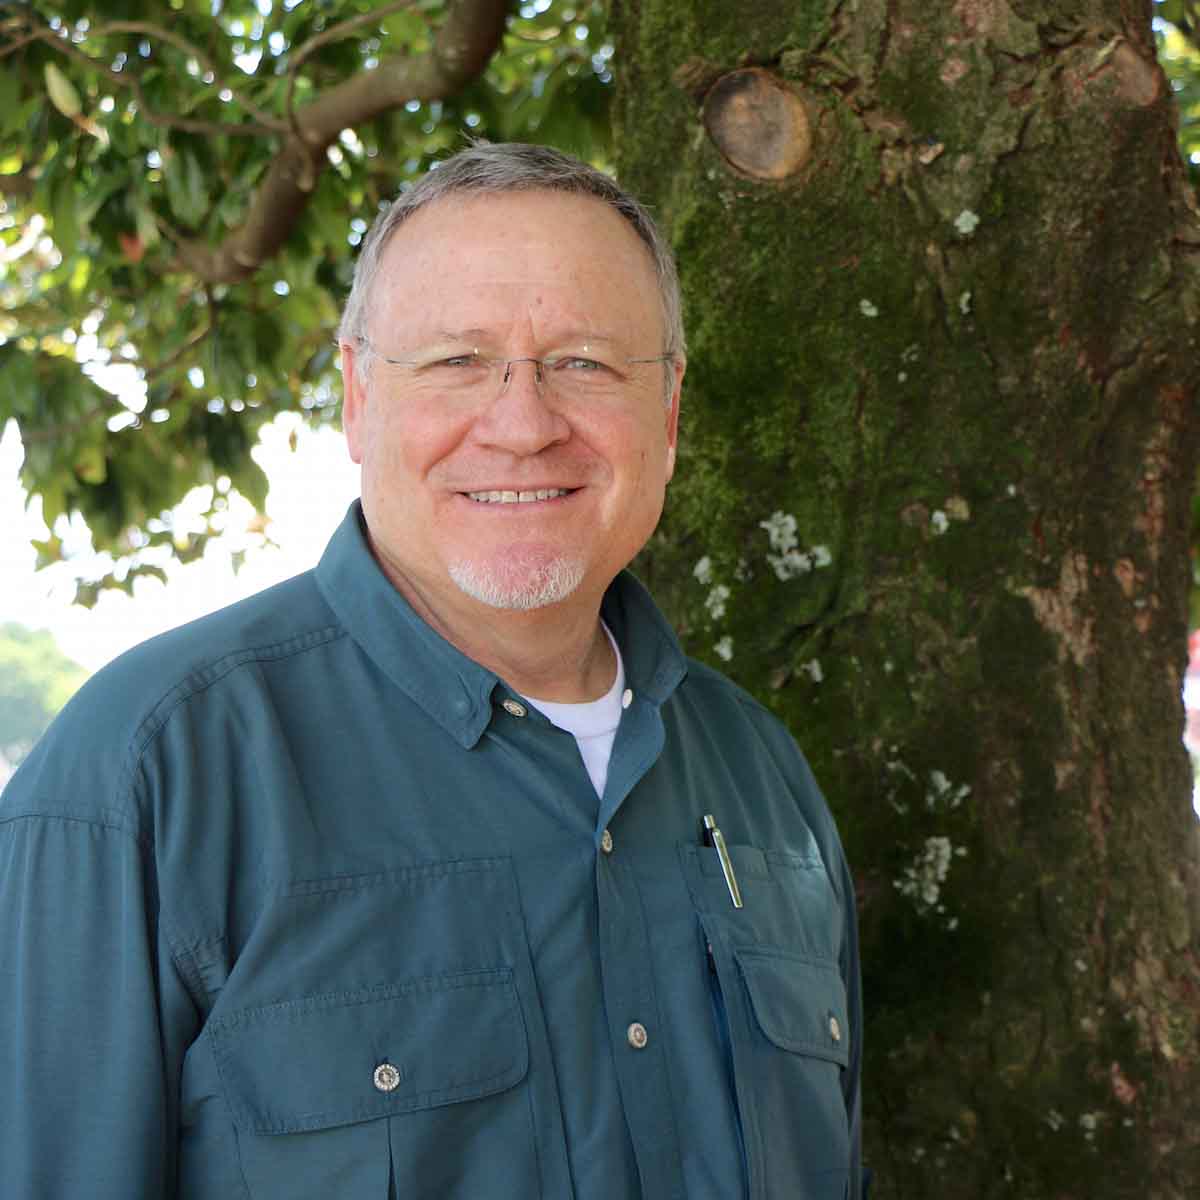 In spring 2016, Jeff Miller took a position as UGA Cooperative Extension coordinator for the Atlanta area.